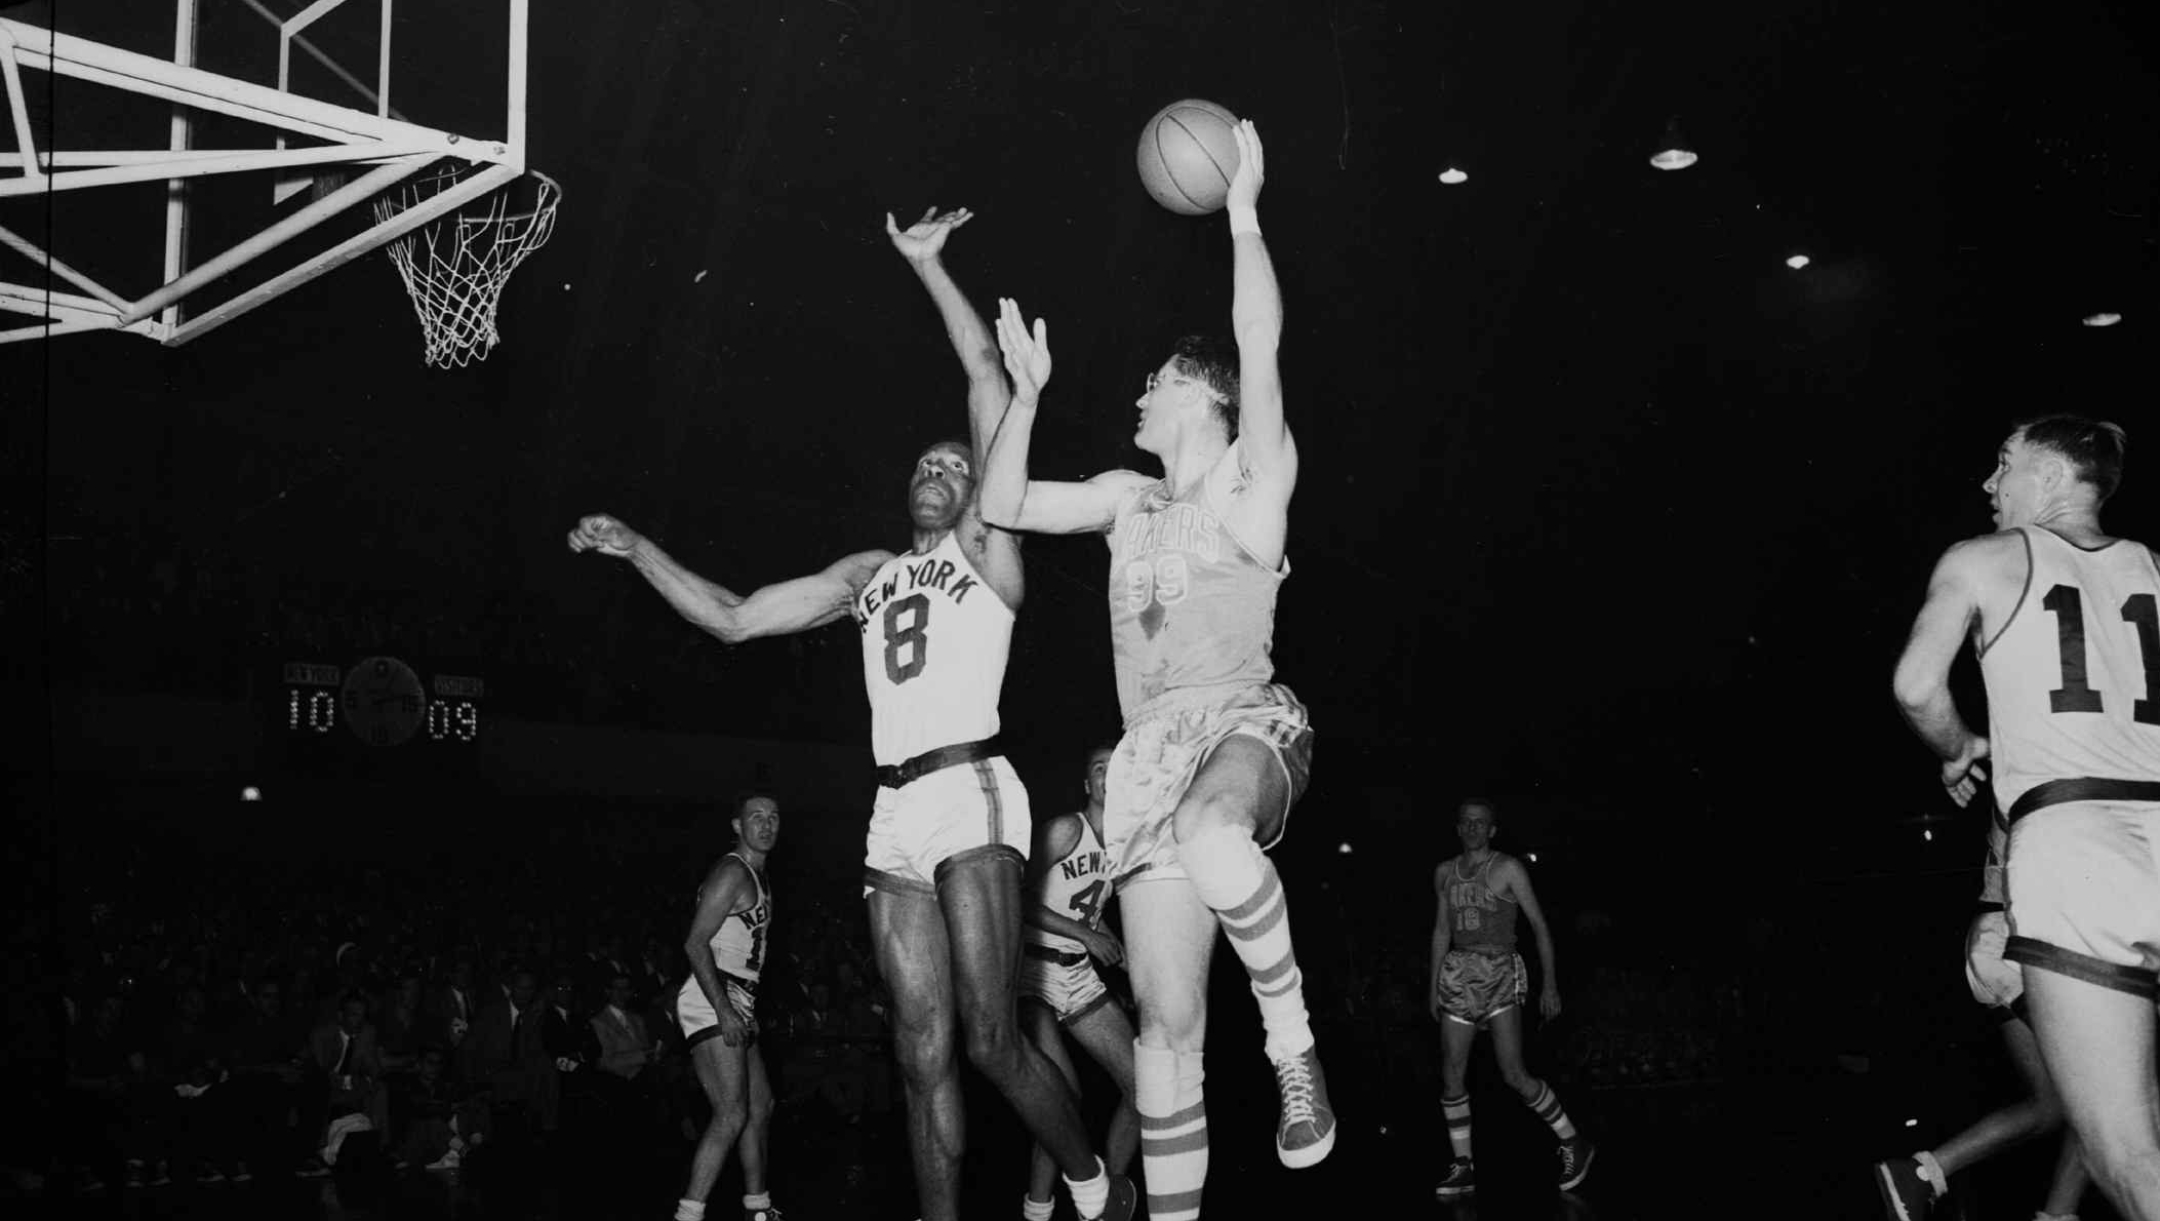 minneapolis lakers - George Mikan, right, six-foot, ten inch center for the Minneapolis lakers, goes way up to make goal as New York Knickerbockers' six-foot, seven, center Nat "Sweetwater" Clifton, 8, makes an unsuccessful attempt to thwart the score on April 8, 1953 at the 69th Regiment Armory in New York.  (AP Photo) - Fotografo: ap